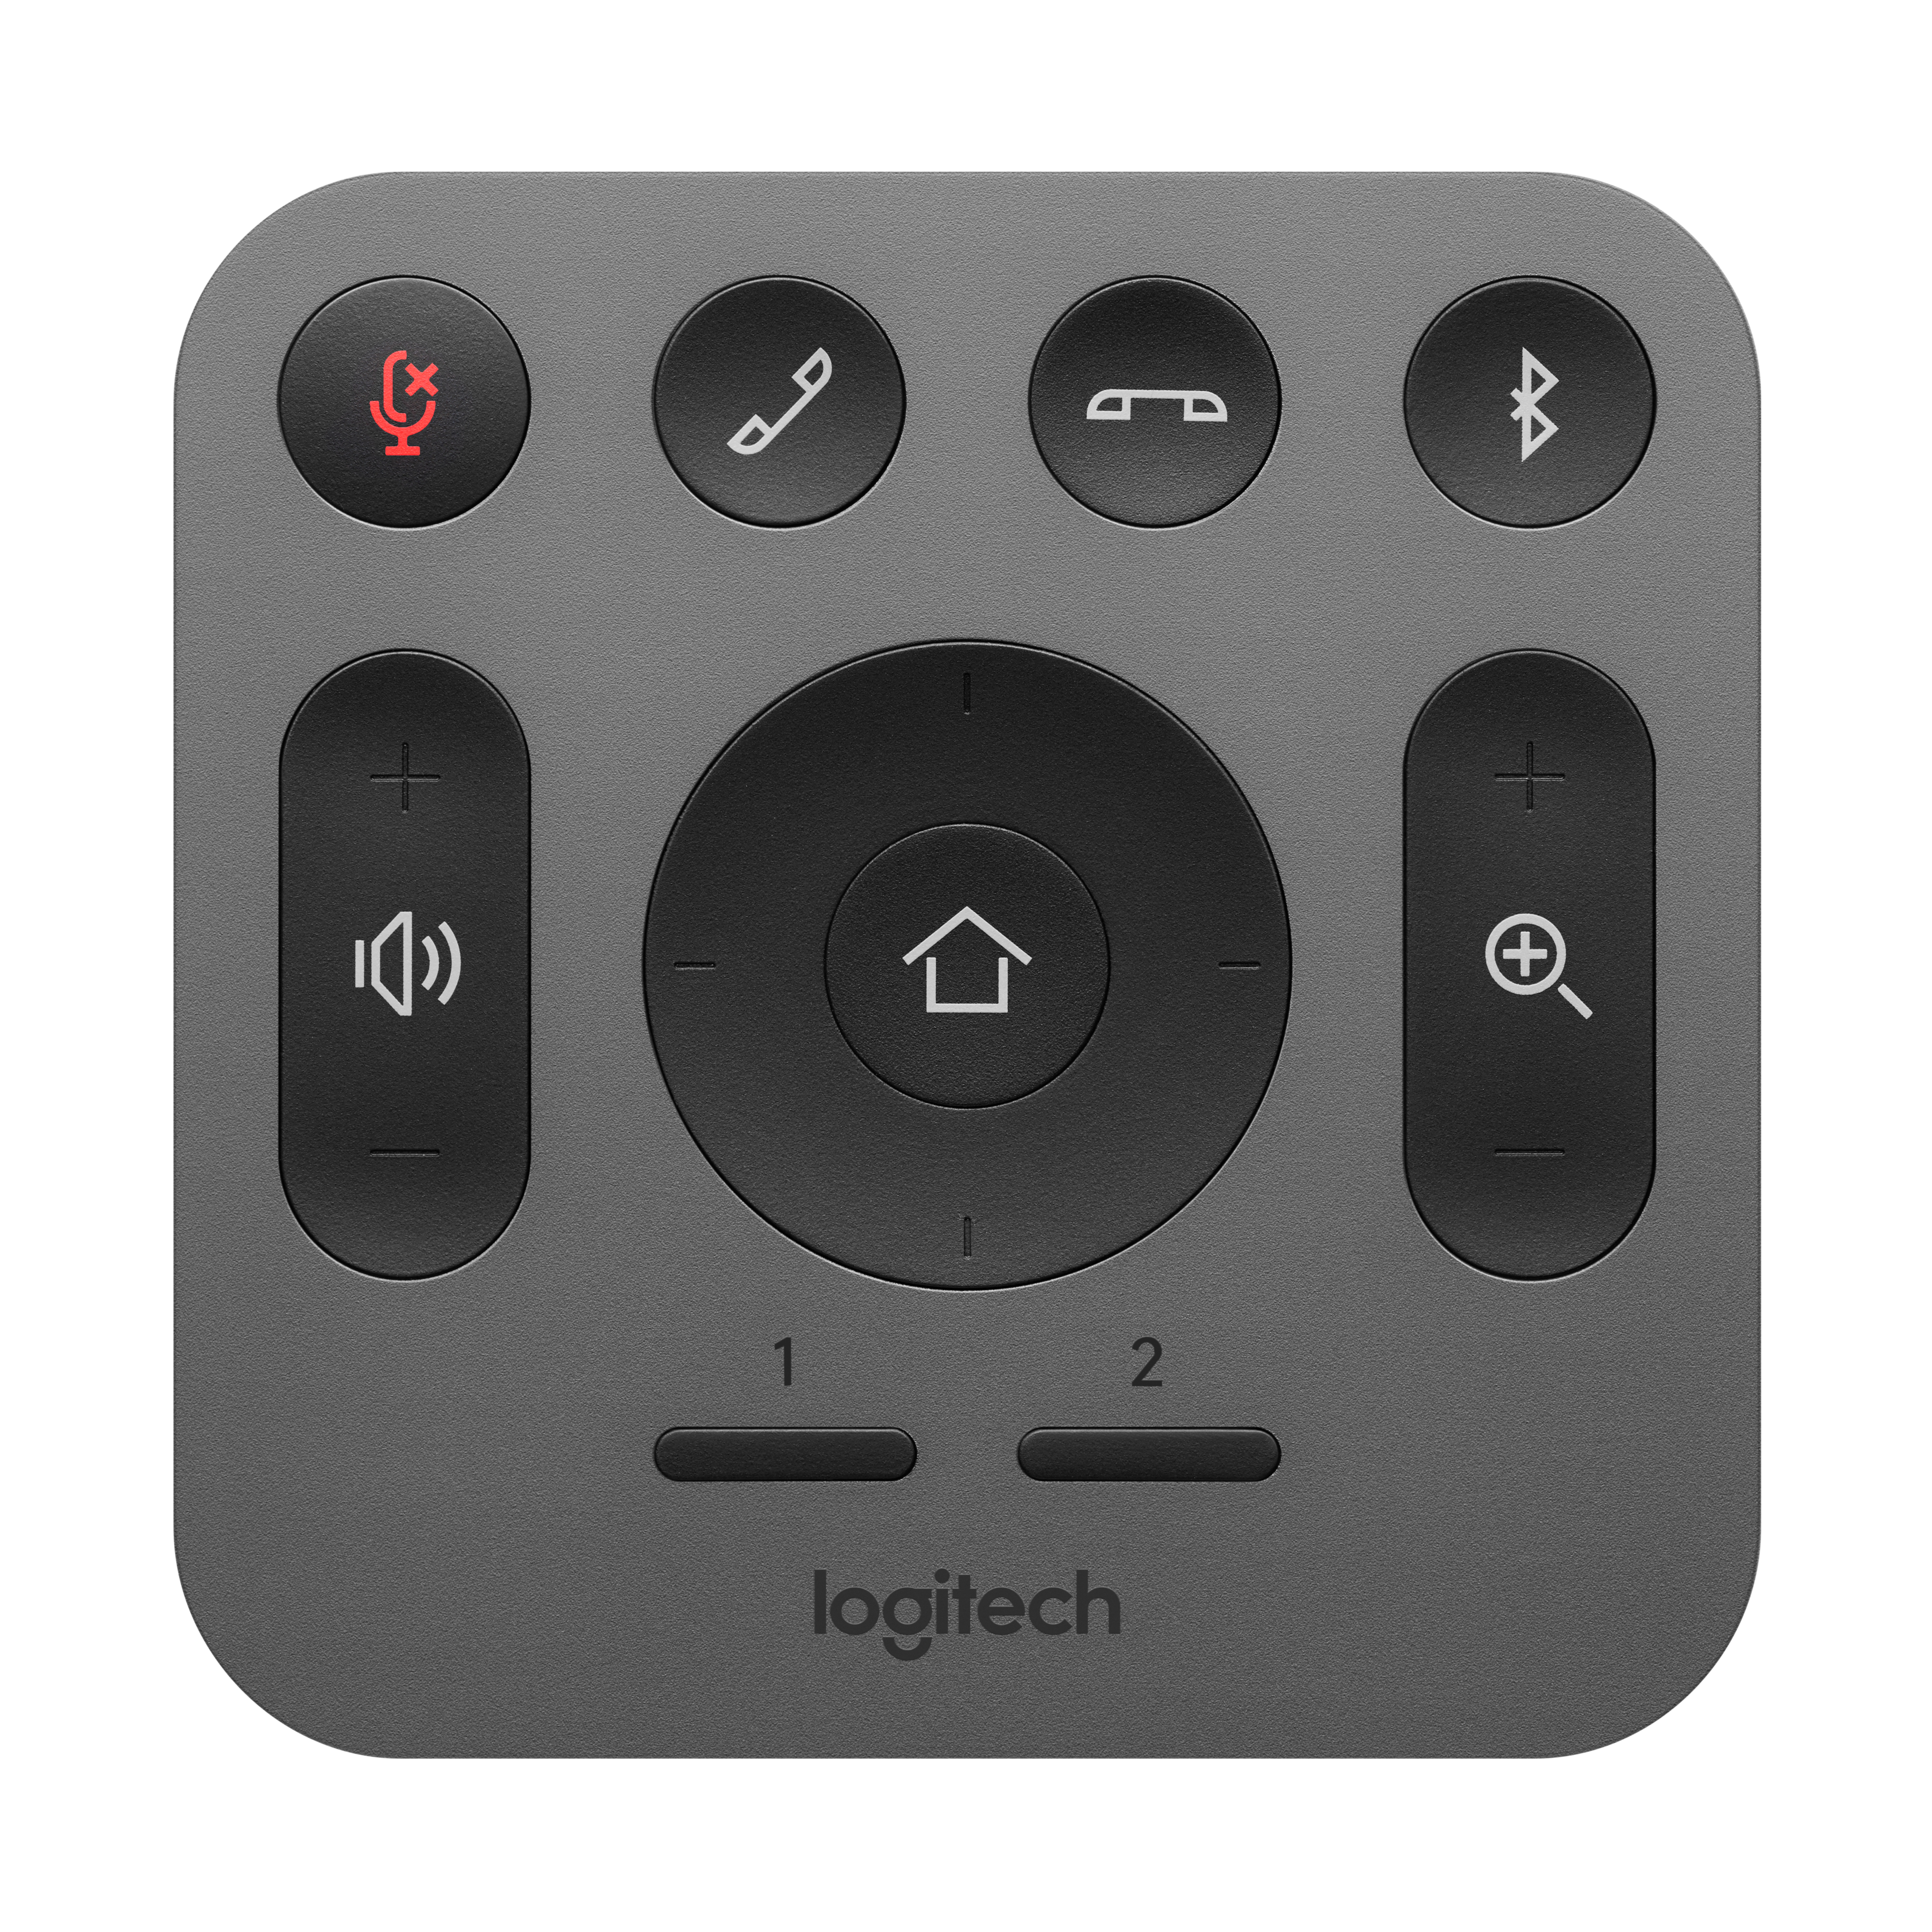 Remote control for MeetUp